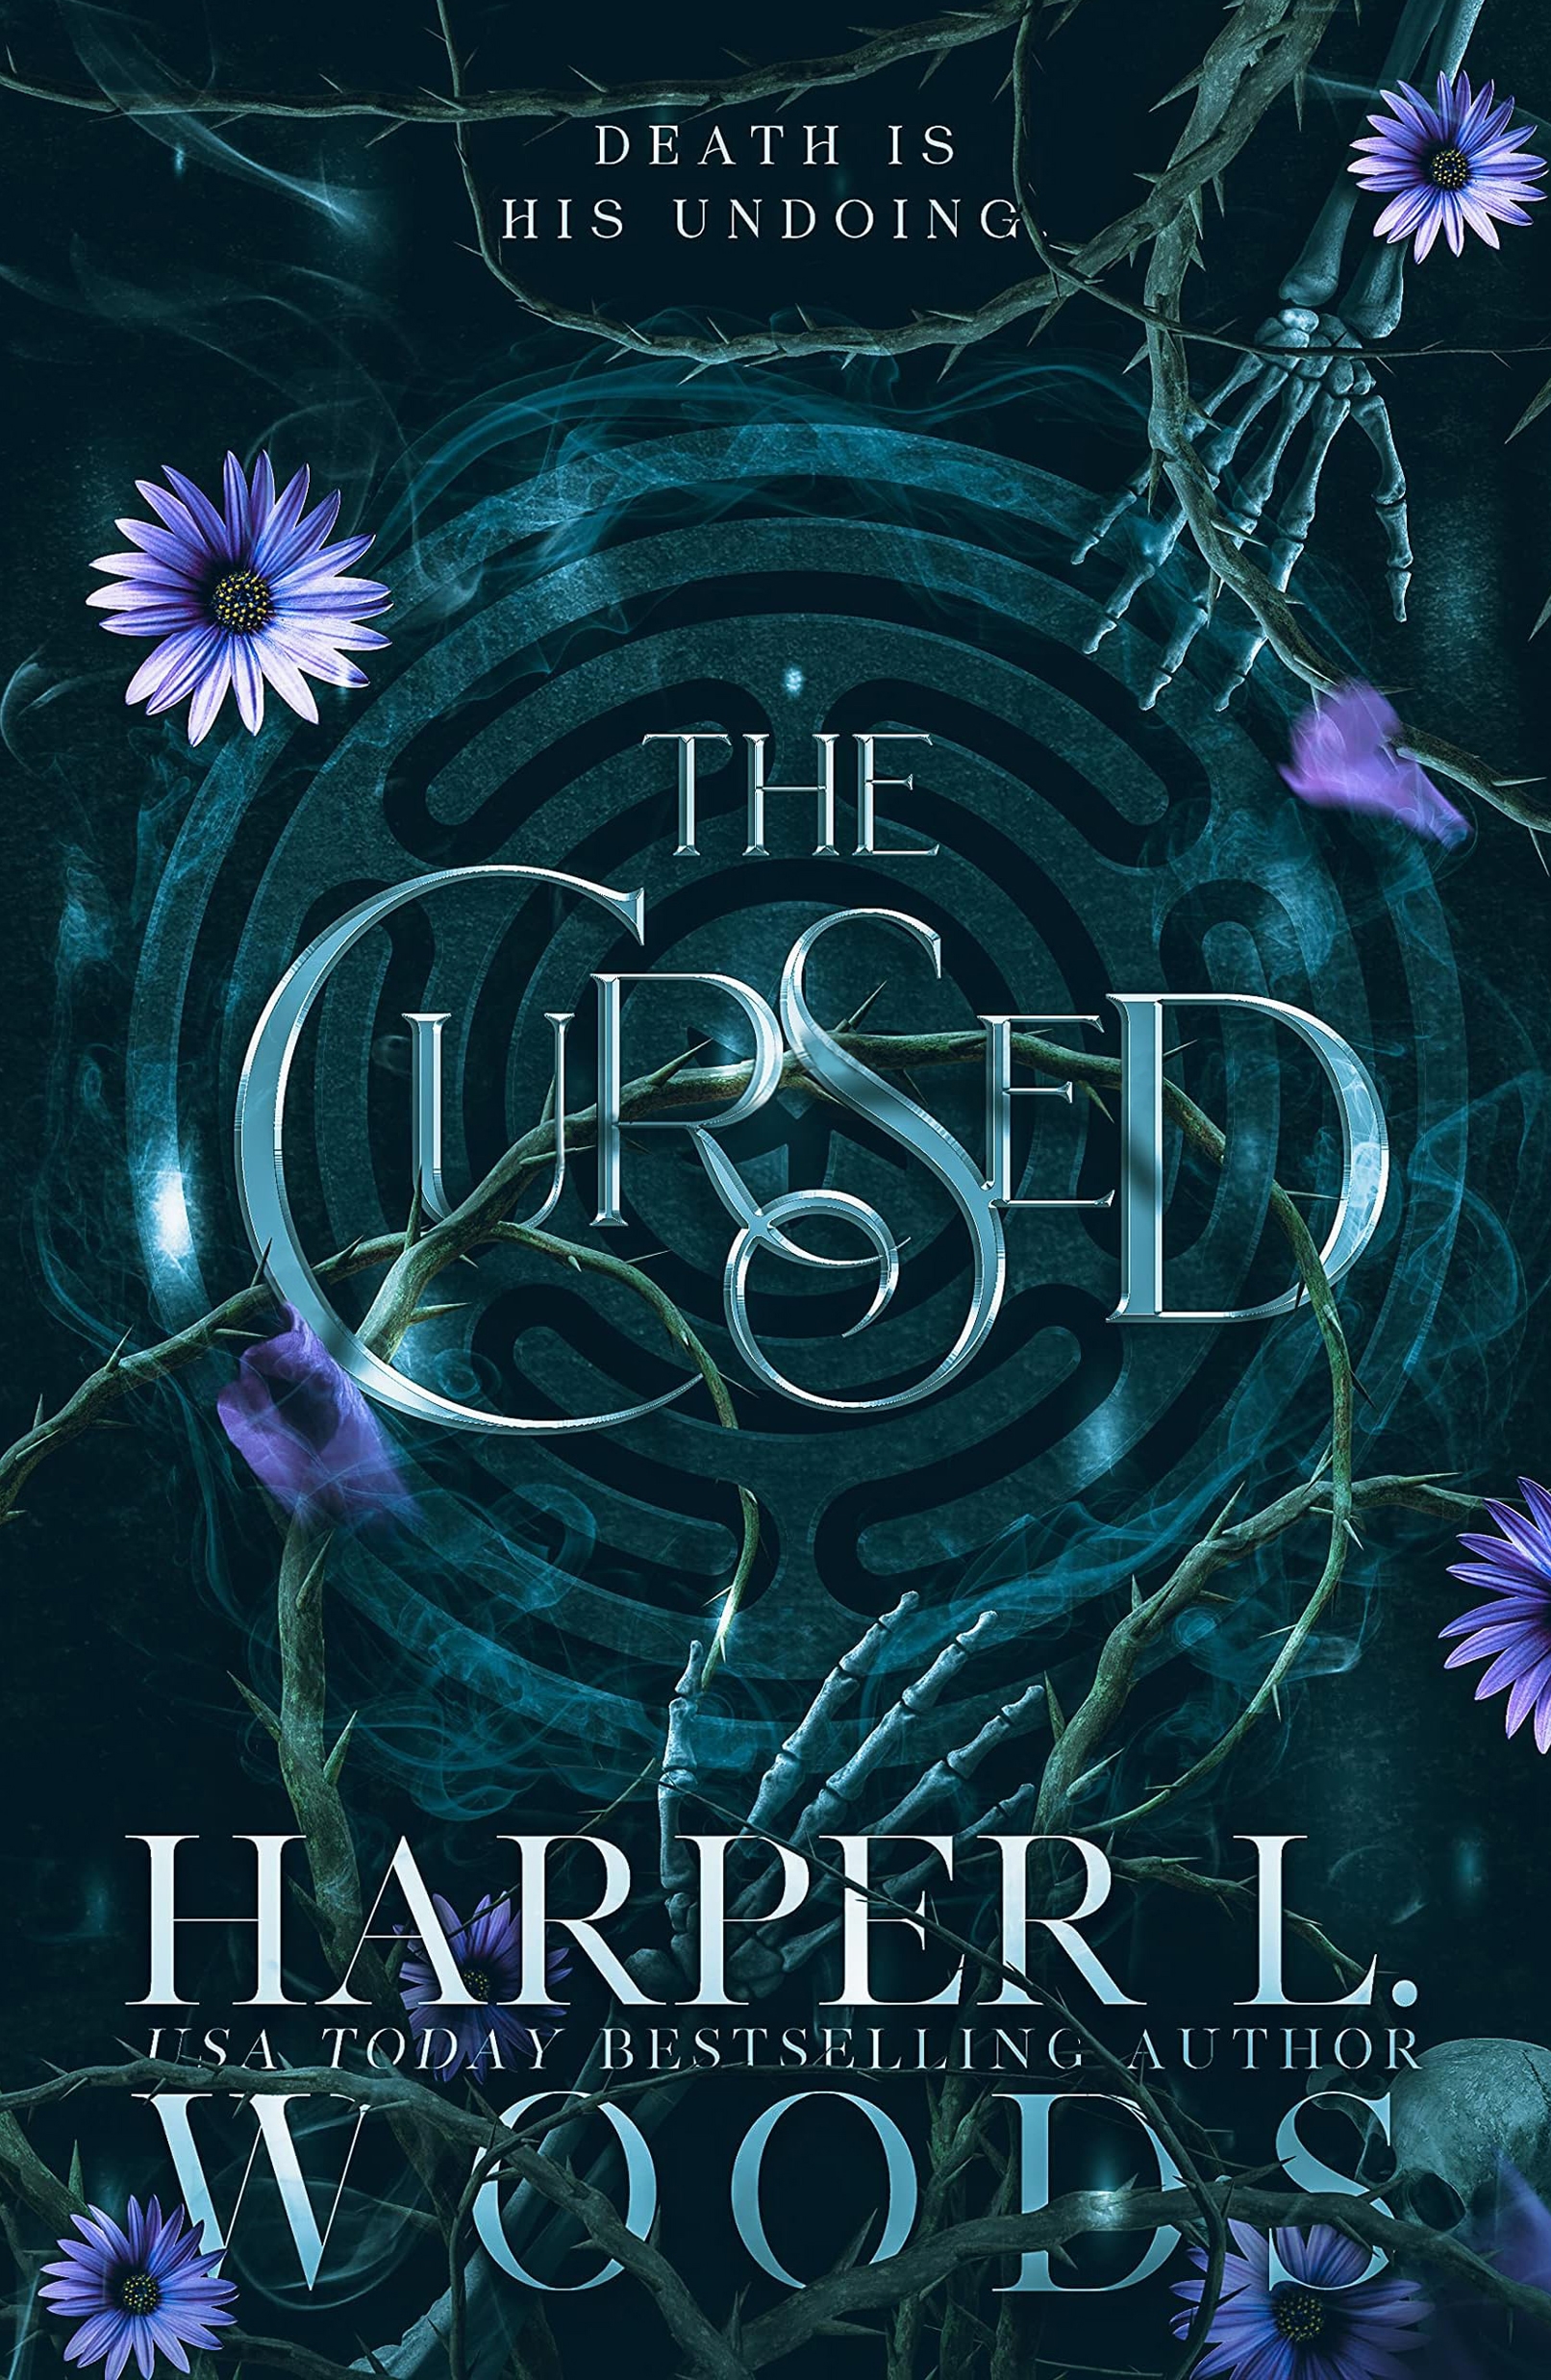 The Cursed by Harper L. Woods